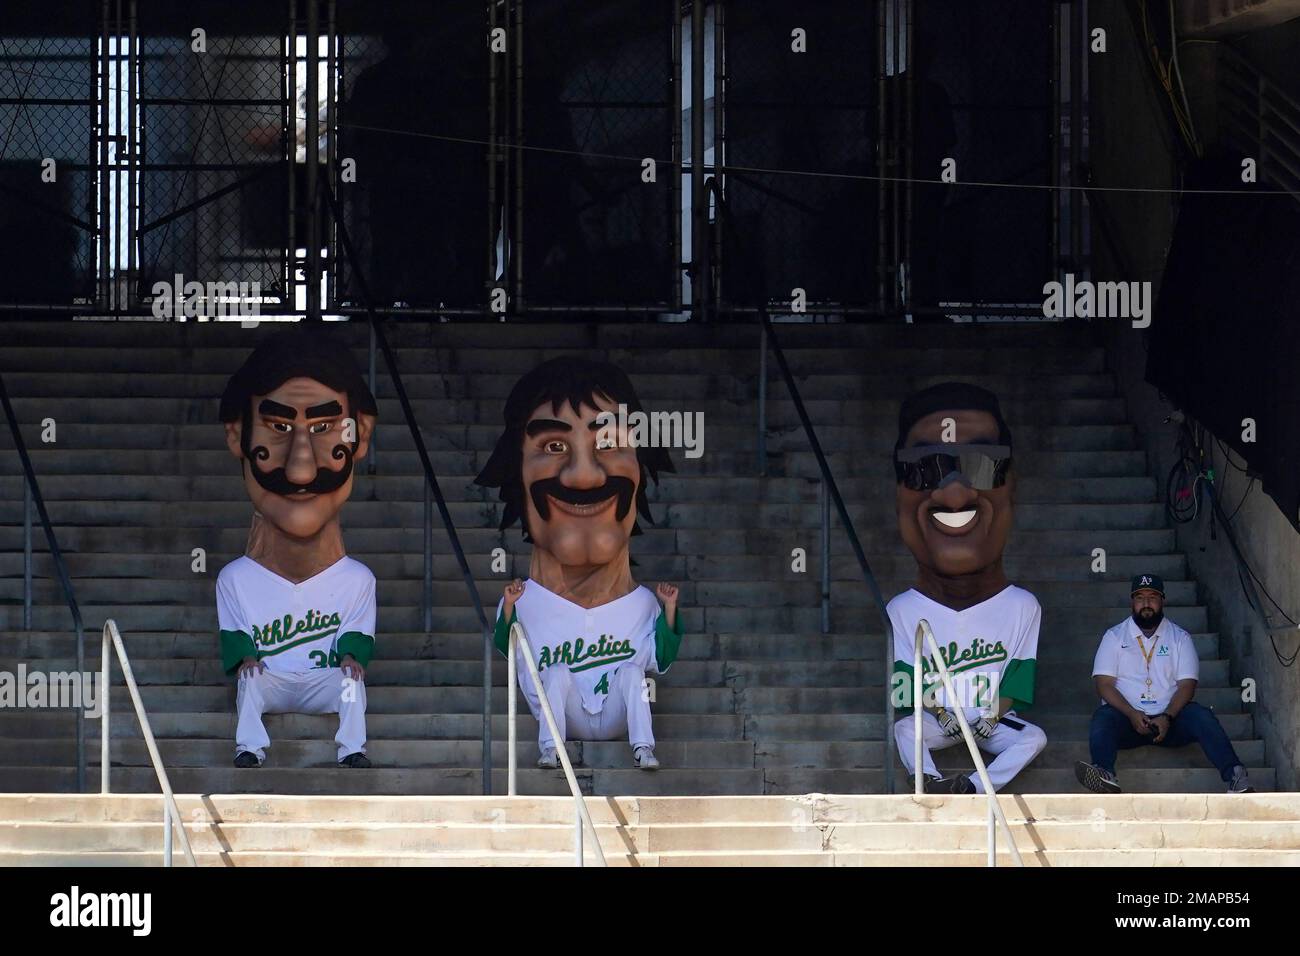 Mascots representing former Oakland Athletics Rollie Fingers, from left,  Dennis Eckersley and Rickey Henderson wait before racing during a baseball  game between the Athletics and the New York Yankees in Oakland, Calif.